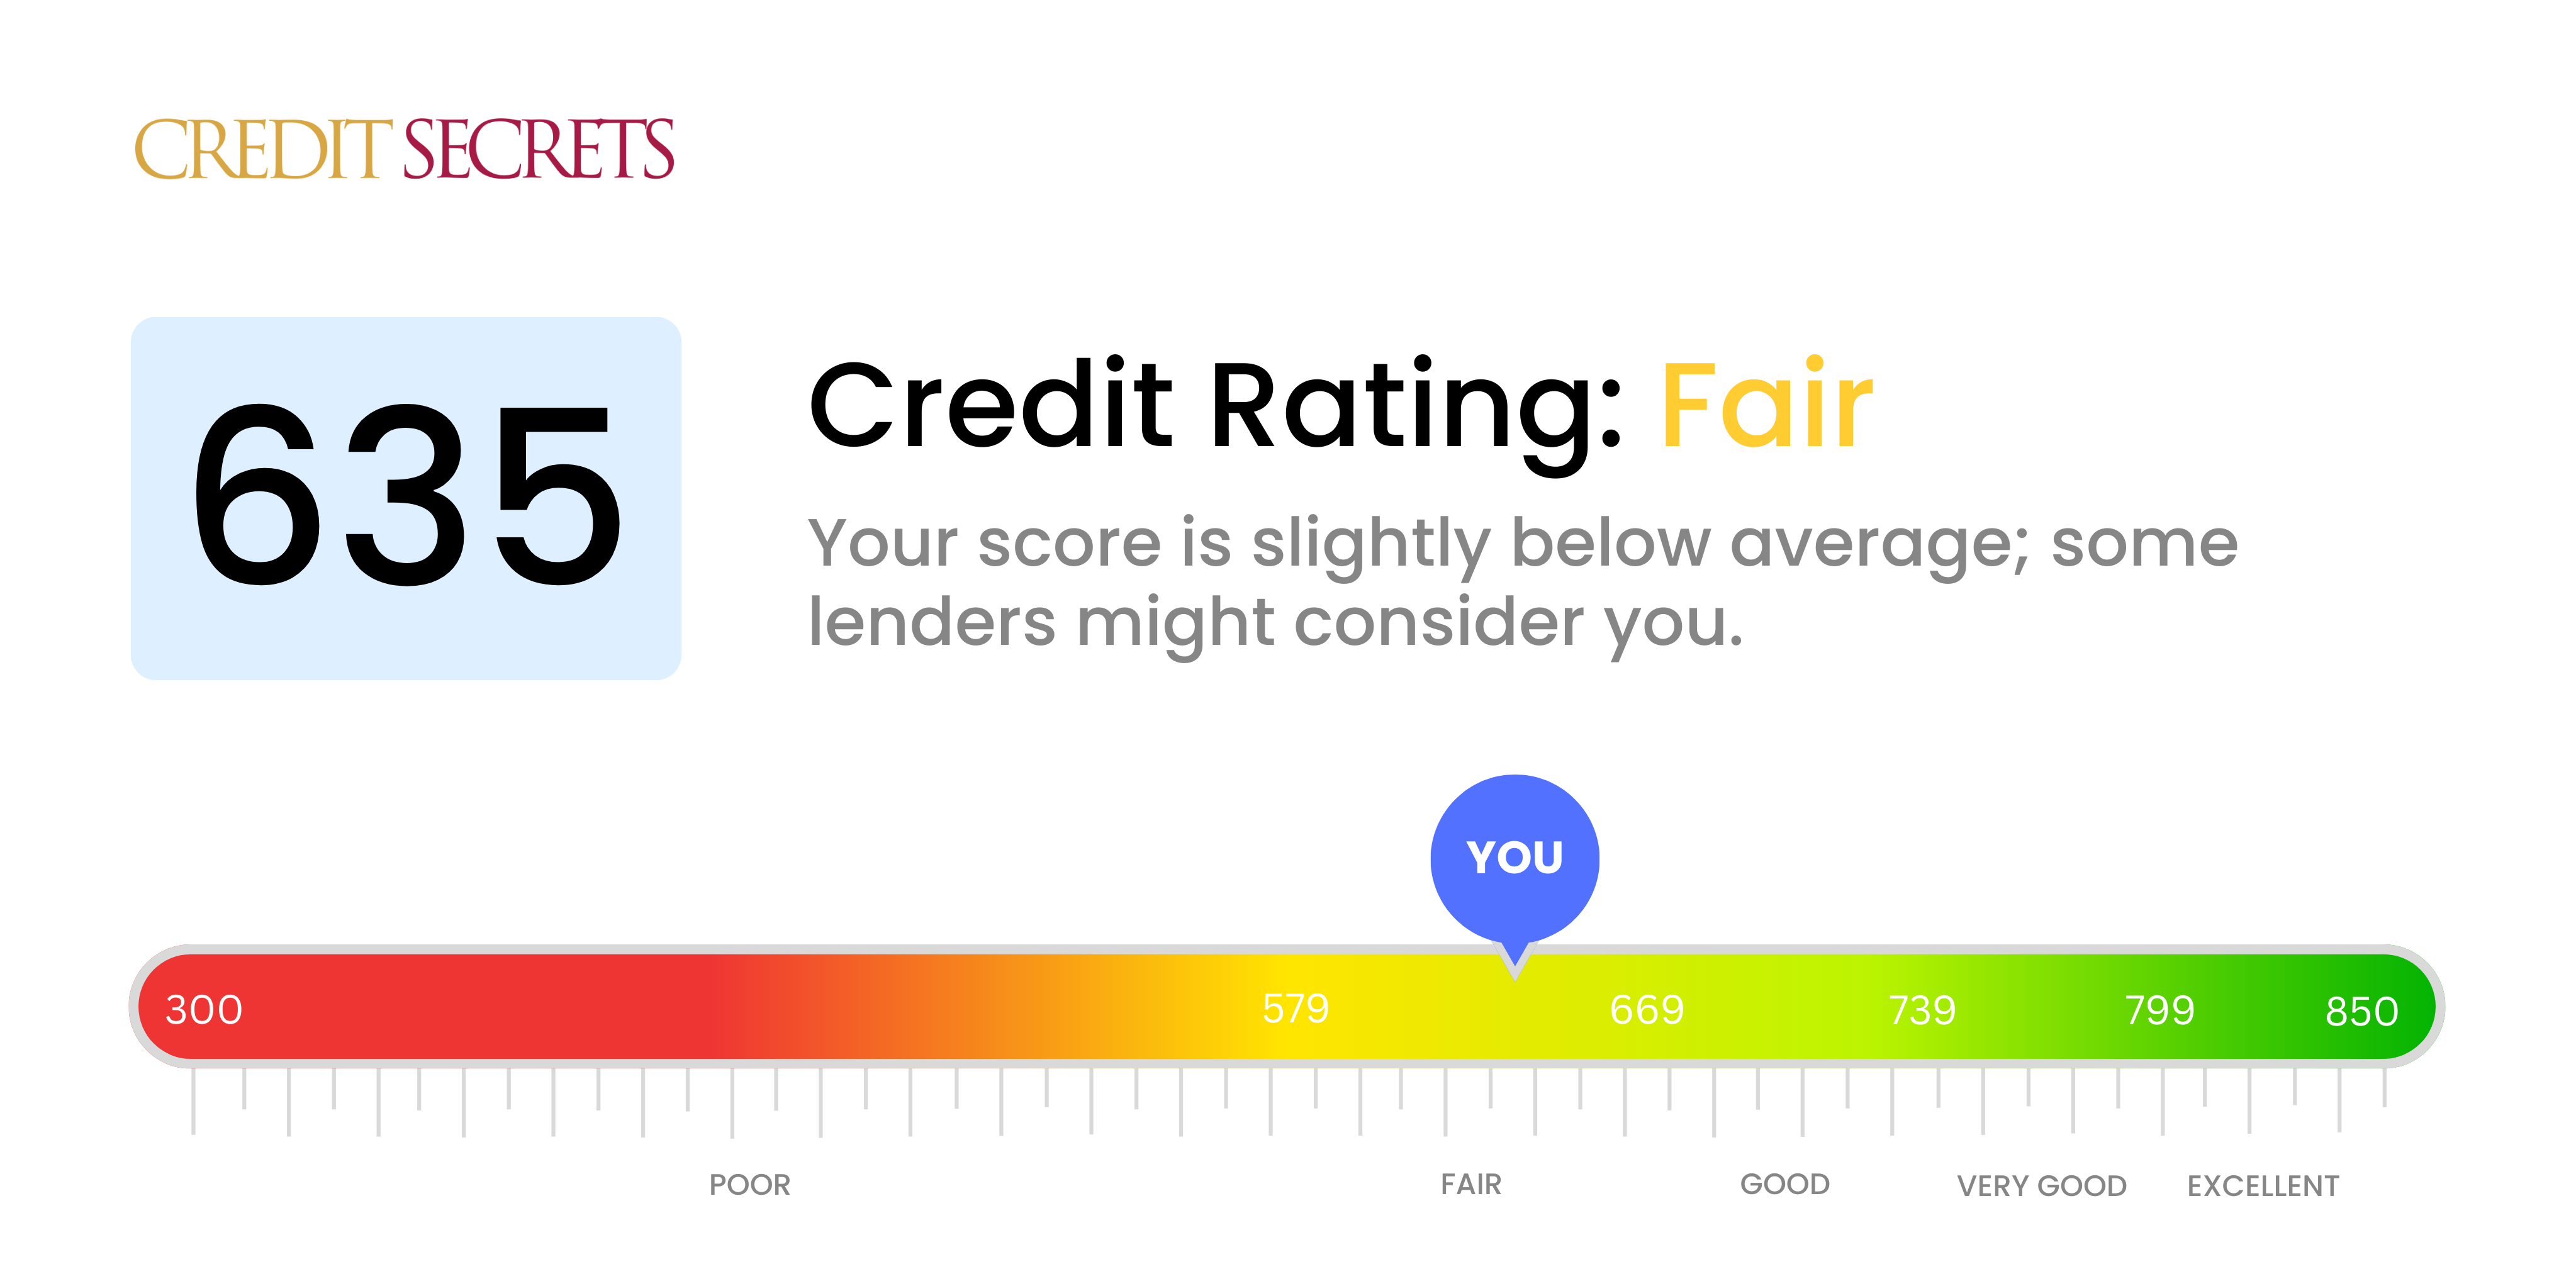 Is 635 a good credit score?